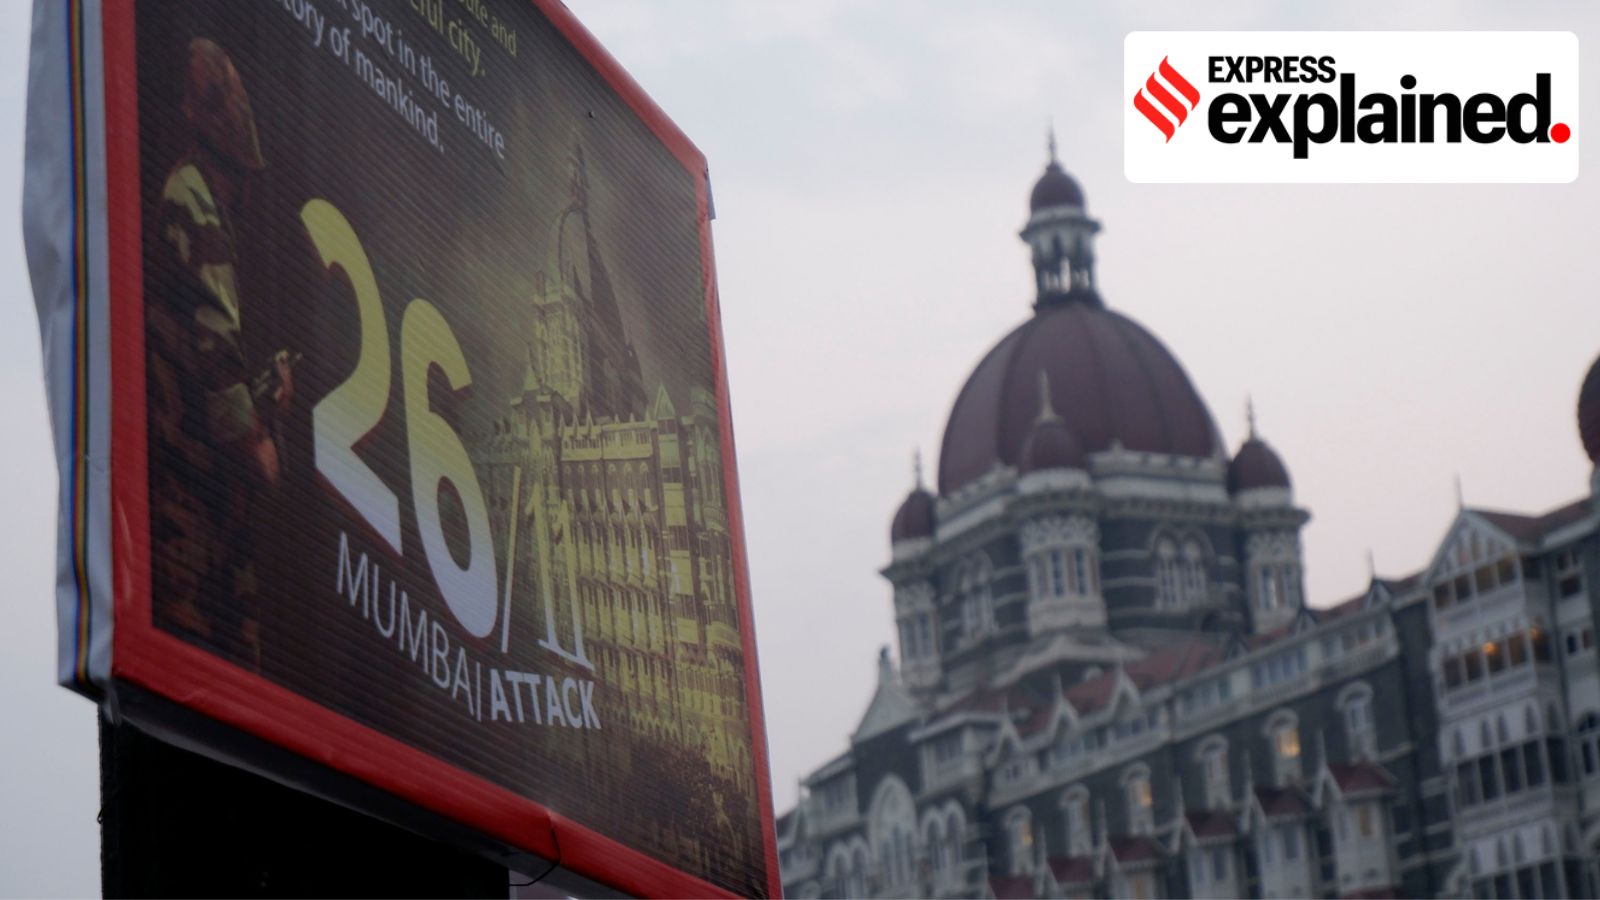 10 Years After 26/11 Attack, Time To Move On, Says Mumbai